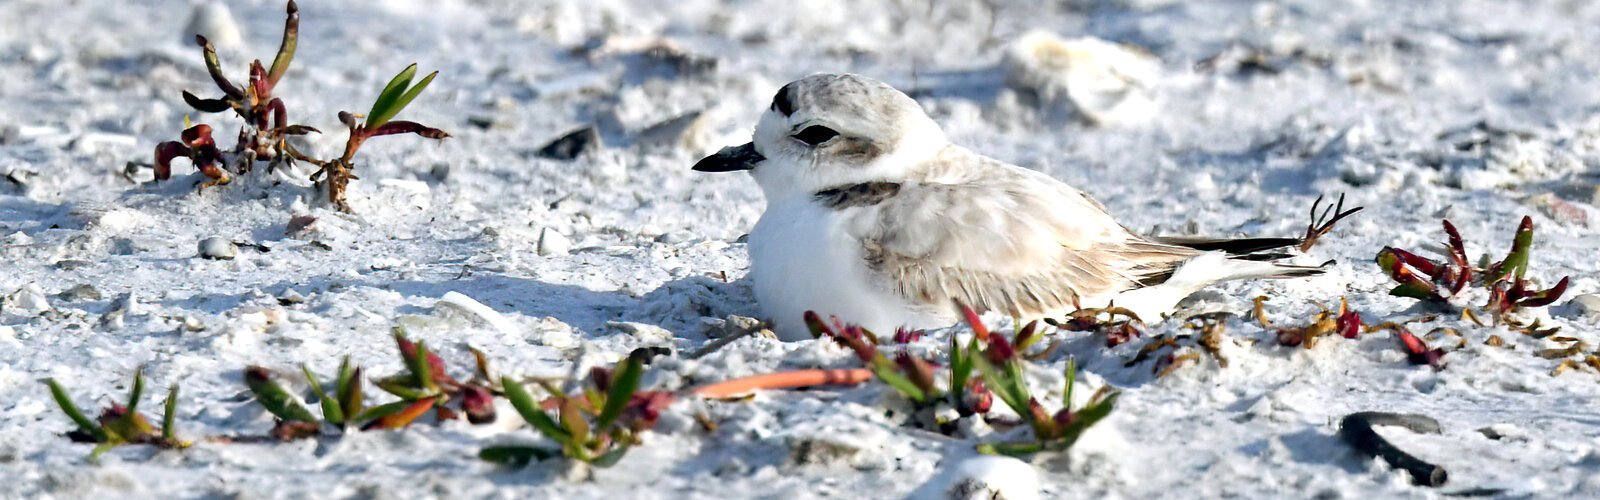 Another state-threatened species is the sand-colored snowy plover, a solitary nesting bird incubating in a scrape in the sand. In spite of its camouflage, it is vulnerable to a variety of human disturbances and animal predators.